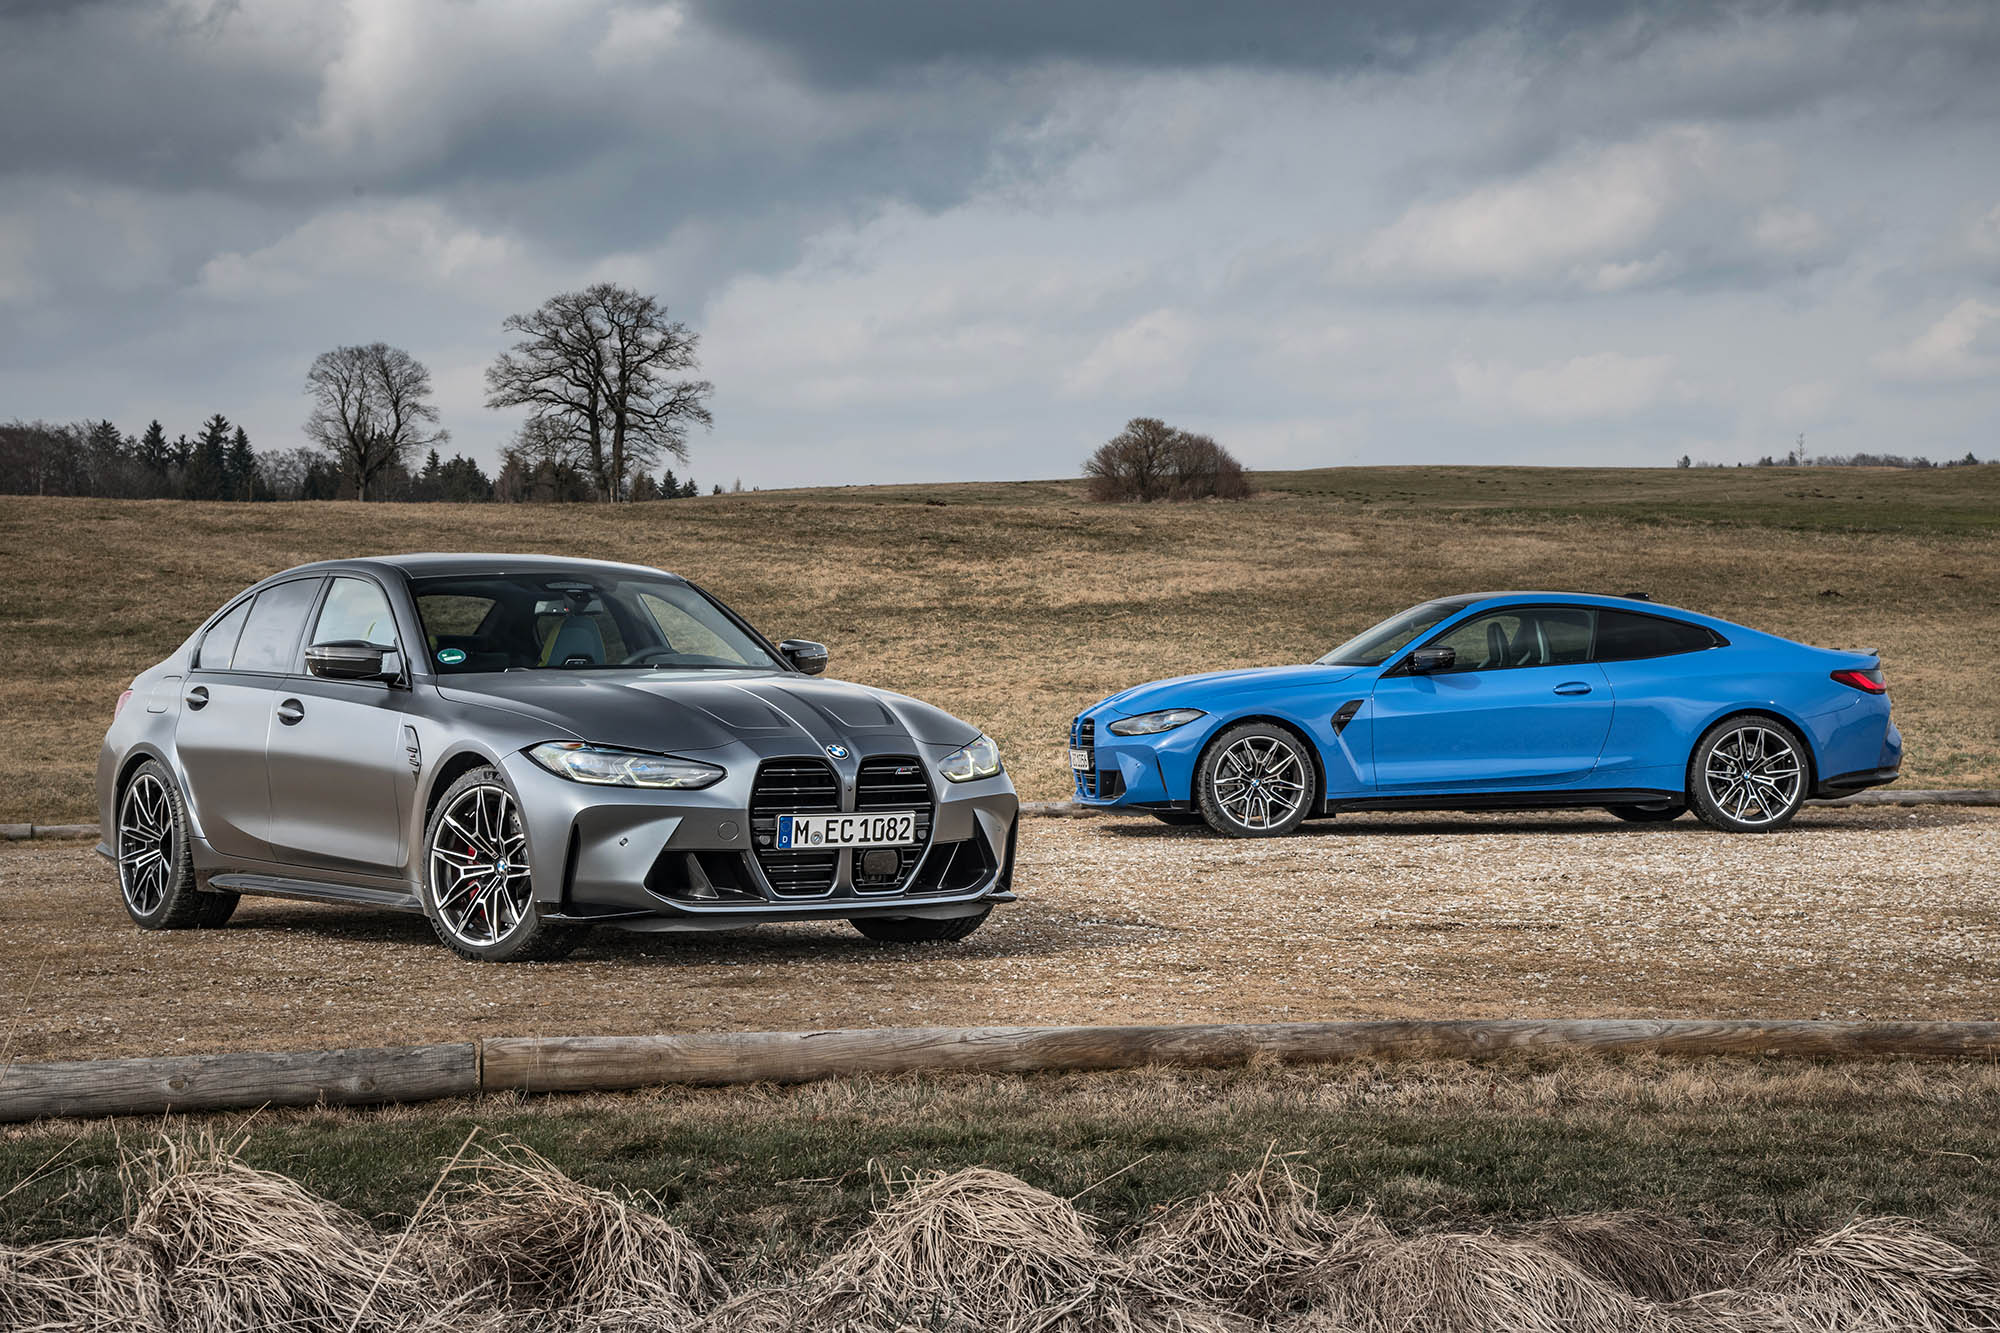 BMW M3 in gray next to a BMW M4 in blue